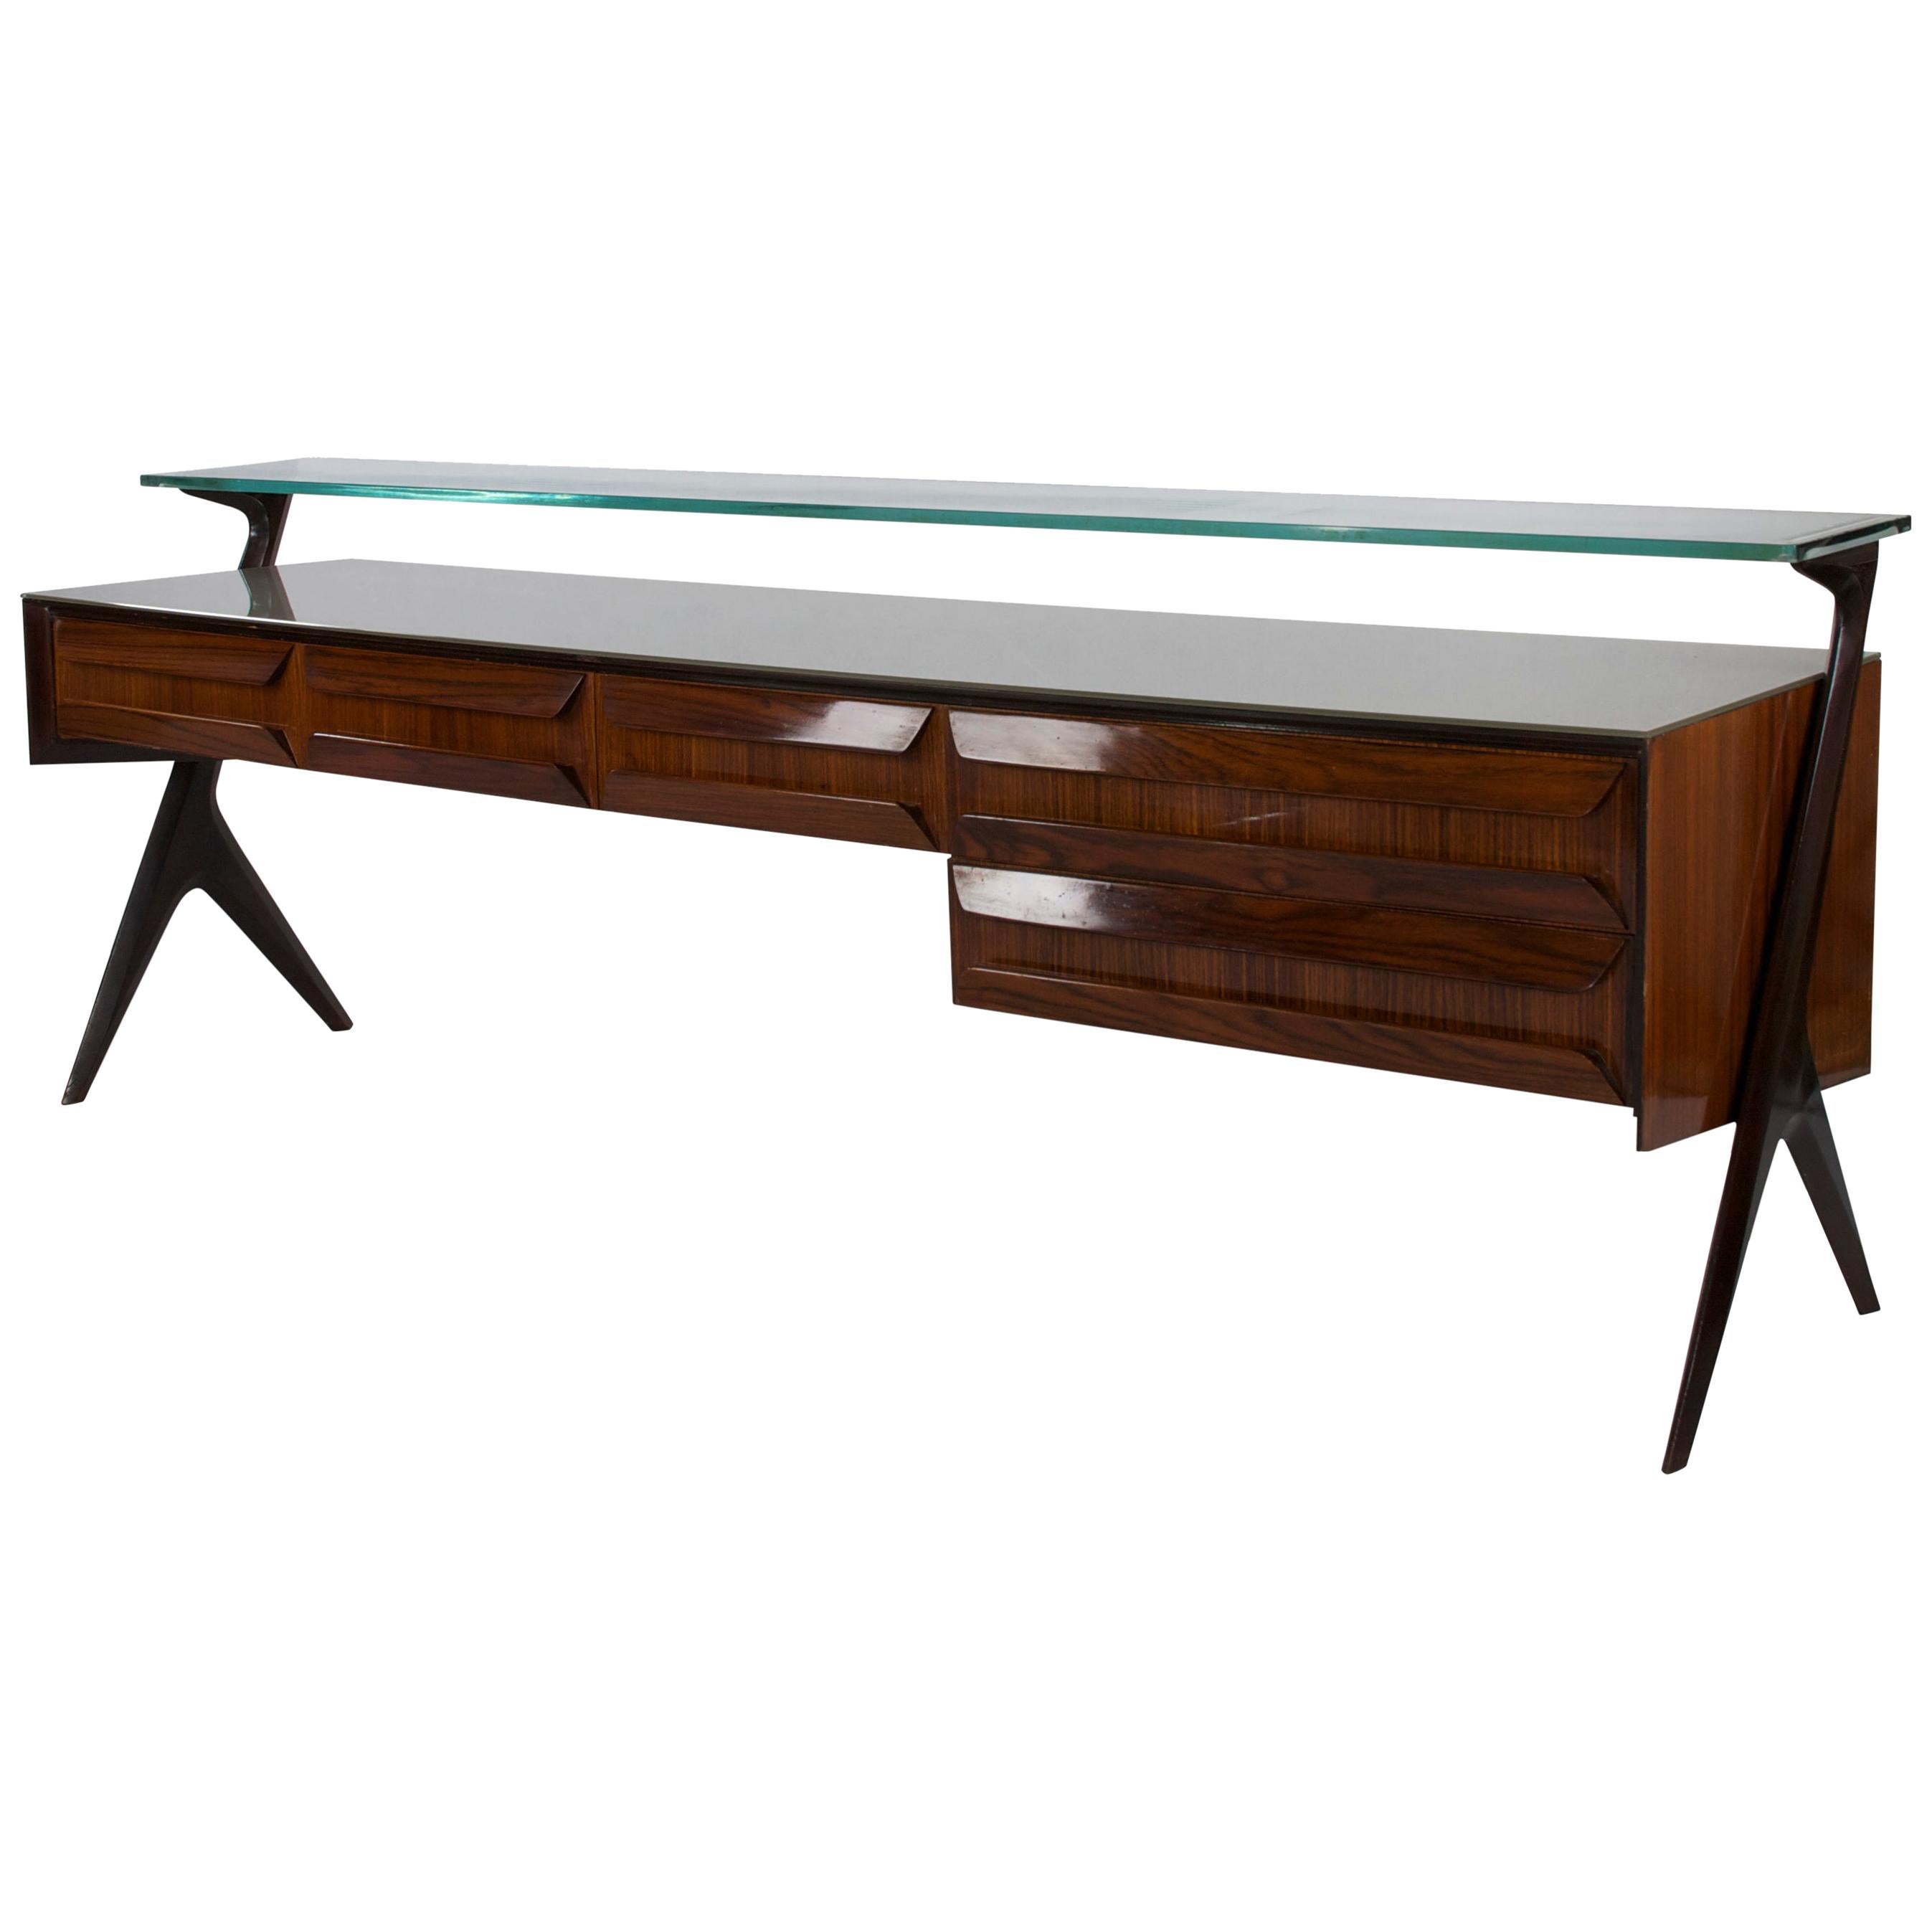 Italian Palisander Satined Glass Sideboard, Manufactured by Dassi Lissone, 1953 For Sale